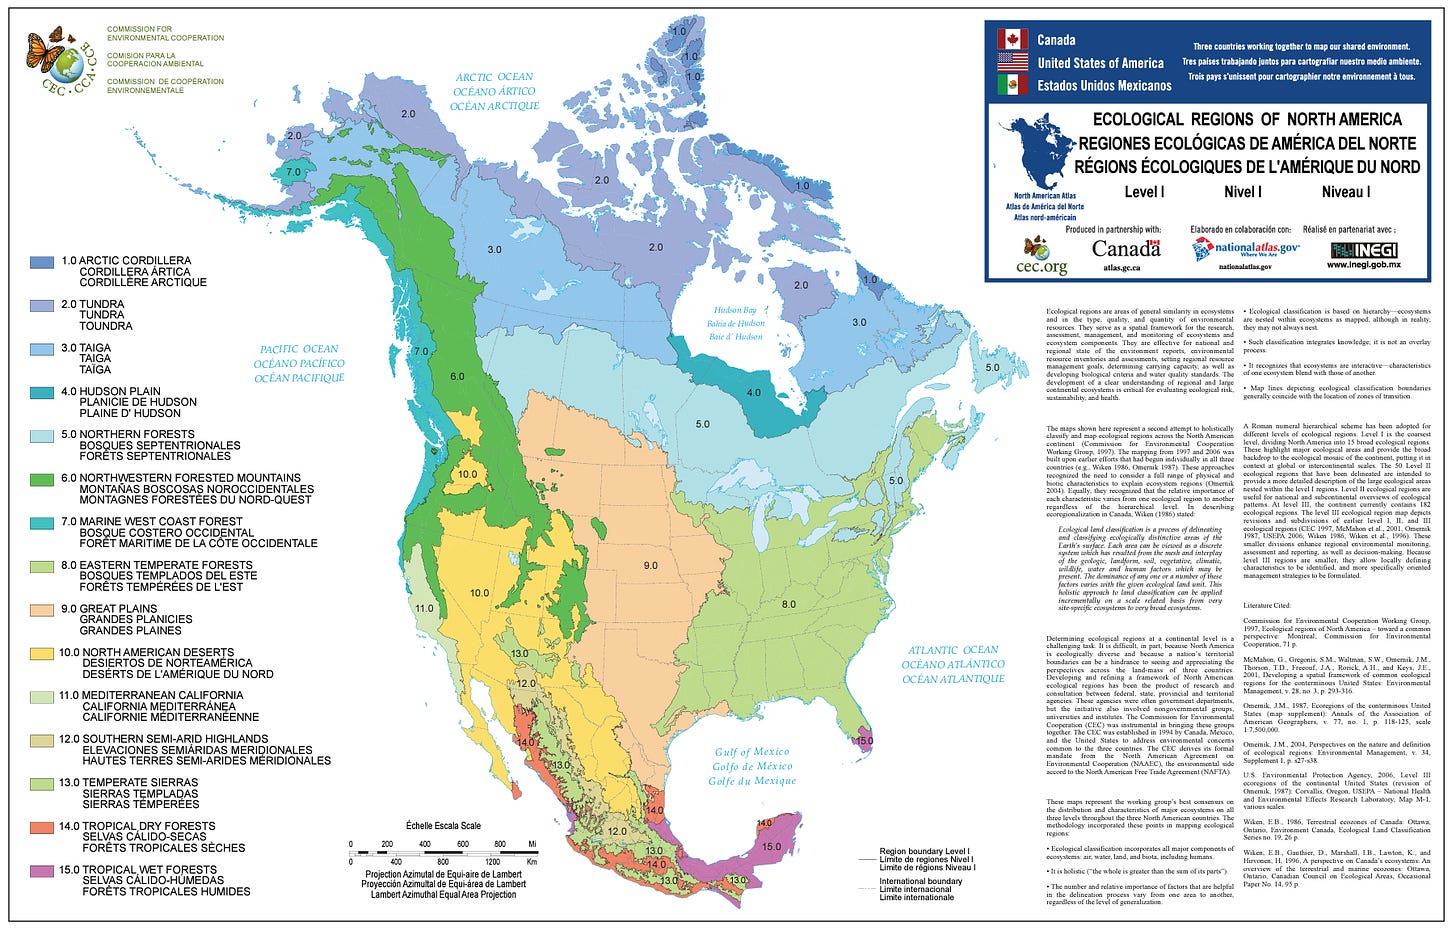 A colorful map of the U.S. divided into 15 ecosystems by the EPA